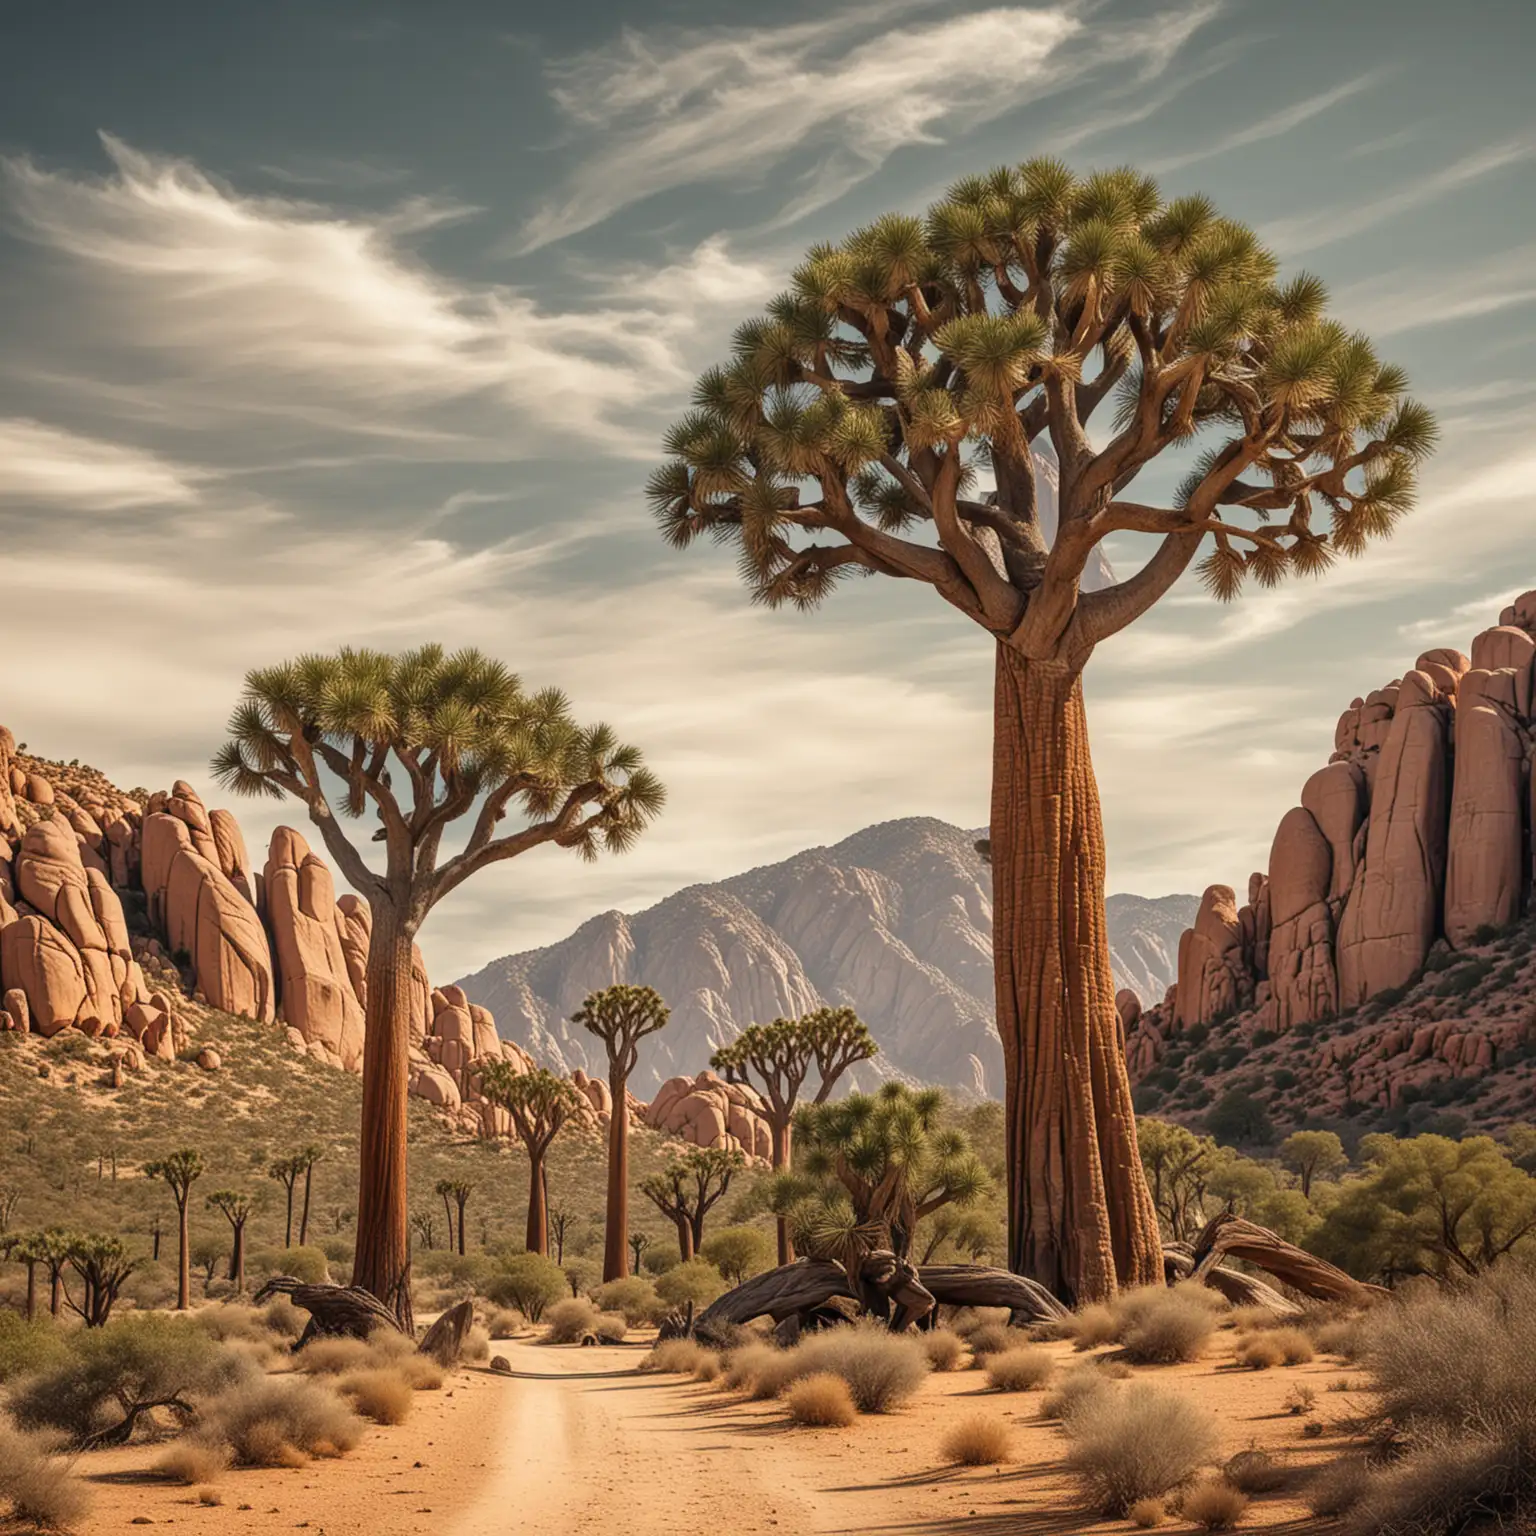 Create a surreal image showing 4 very different types of trees, a Baobab tree, a Joshua tree, a Banyan tree and a giant Sequoia tree all placed together on one mountain side.